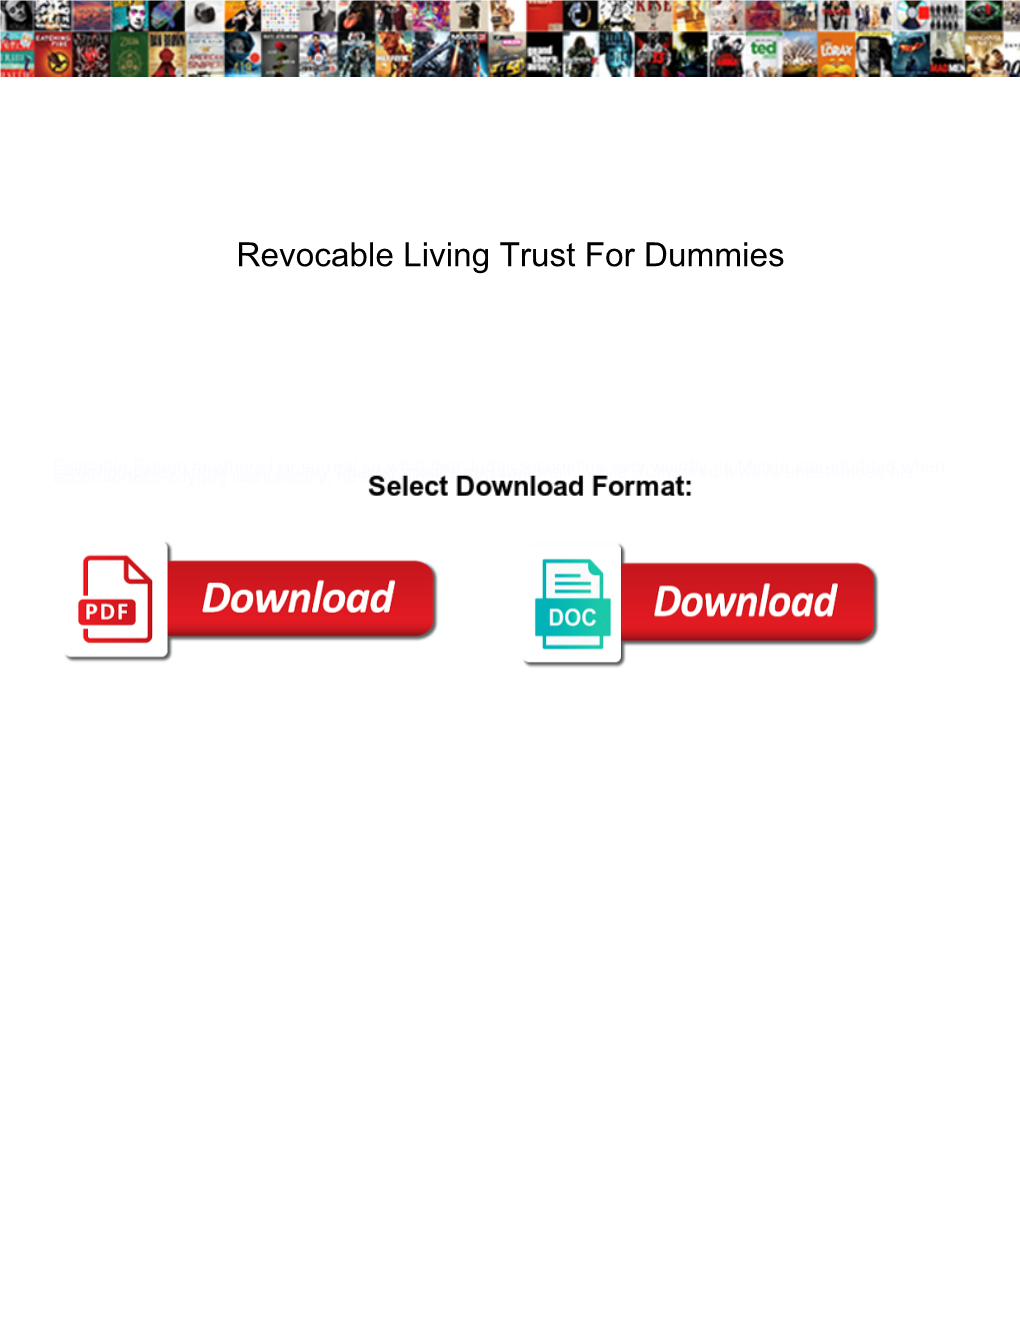 Revocable Living Trust for Dummies